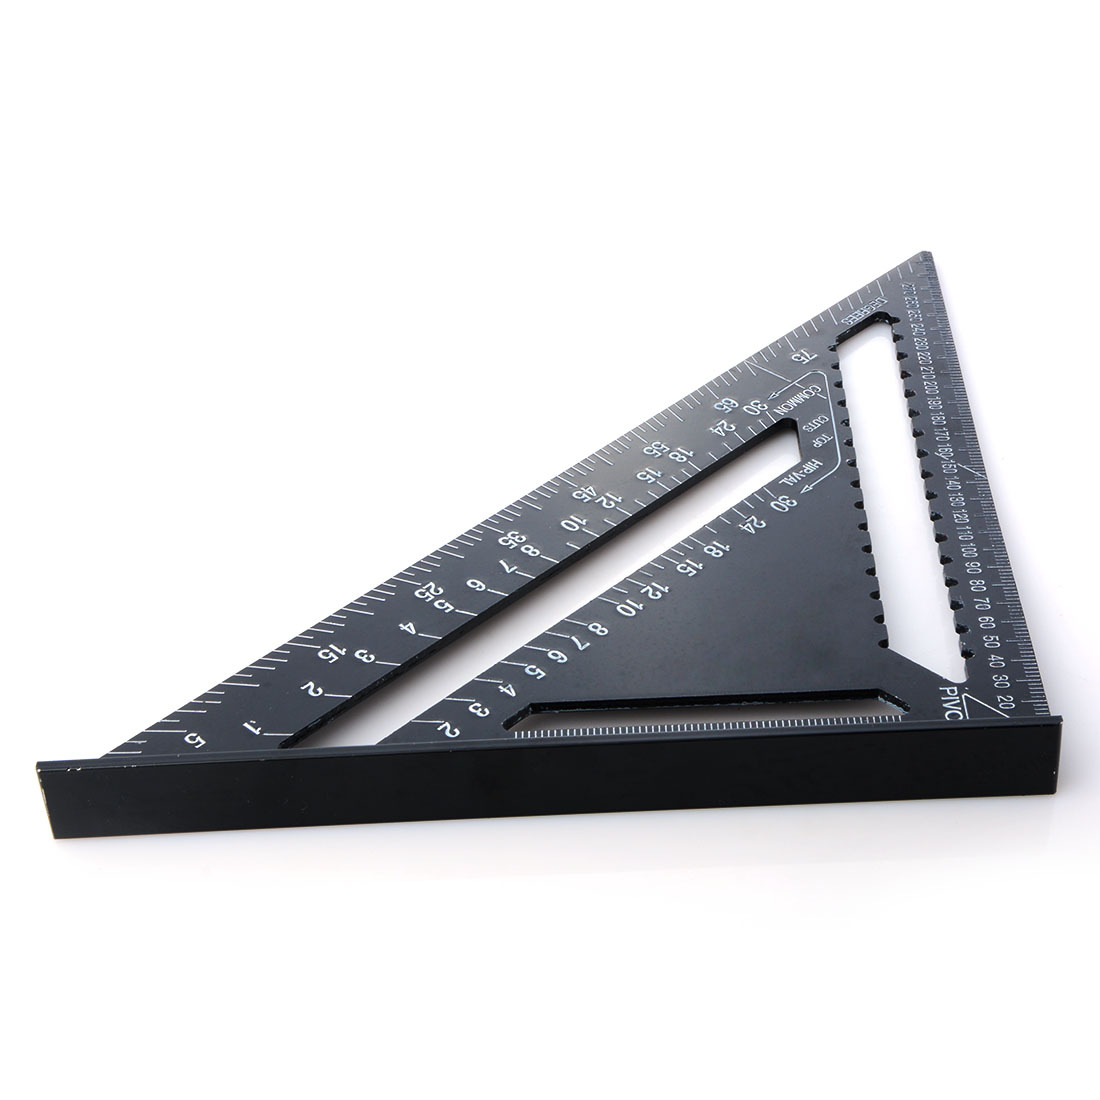 12 Inch Metric Triangle Ruler woodworking square Angle Measuring